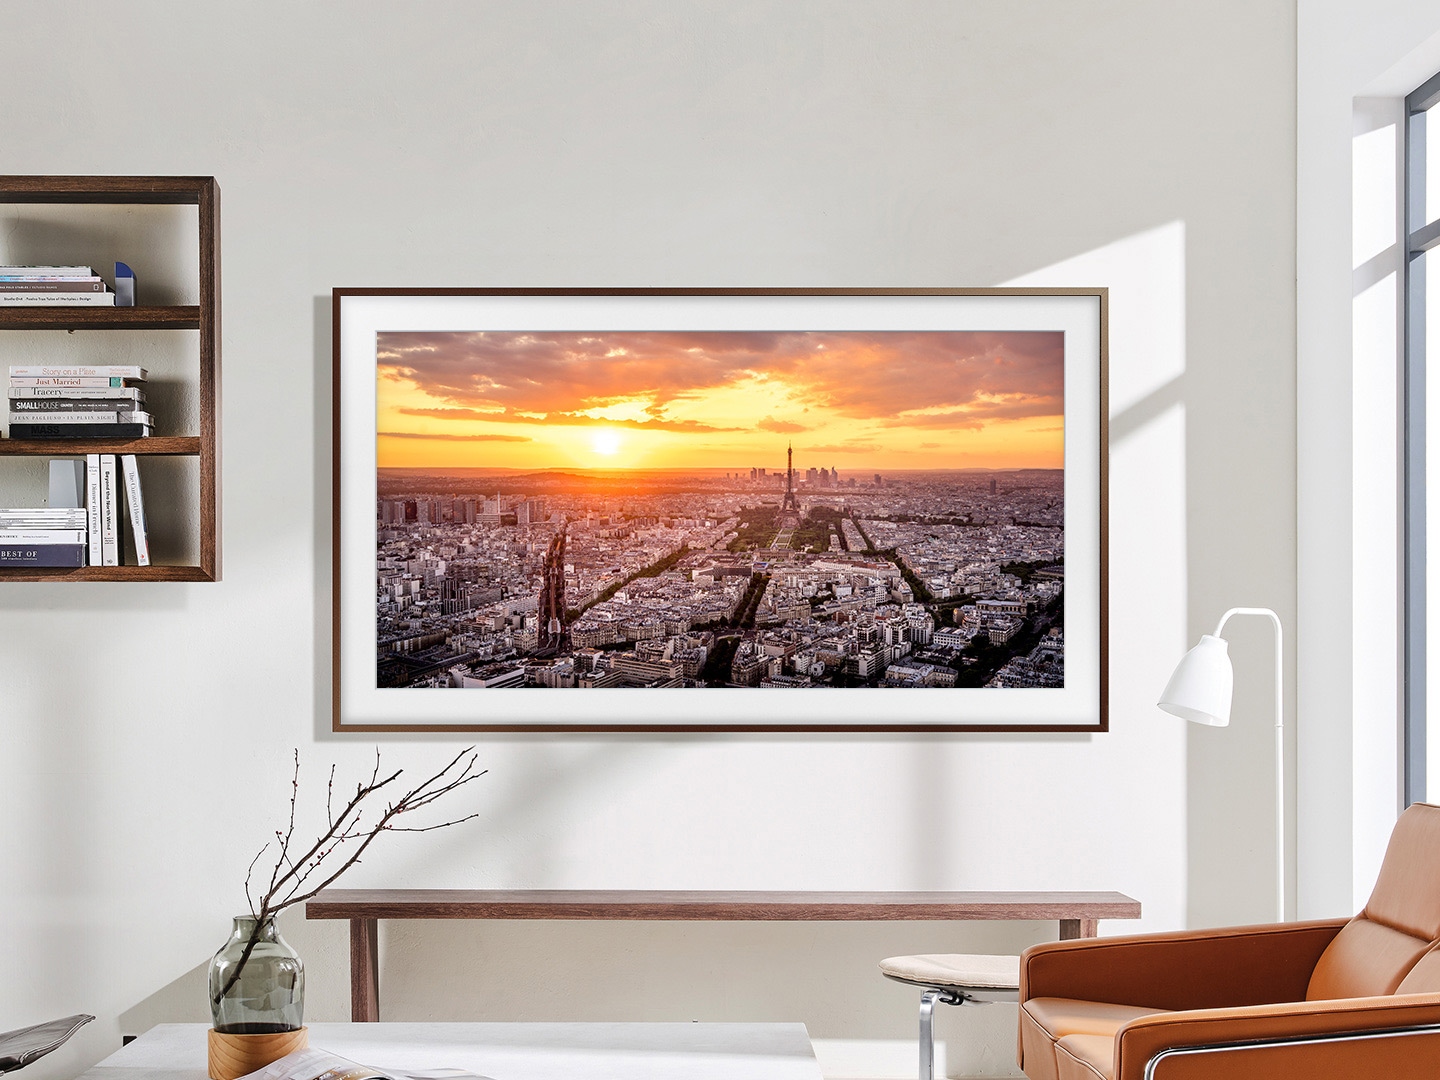 The Frame, personalize your TV the way you like